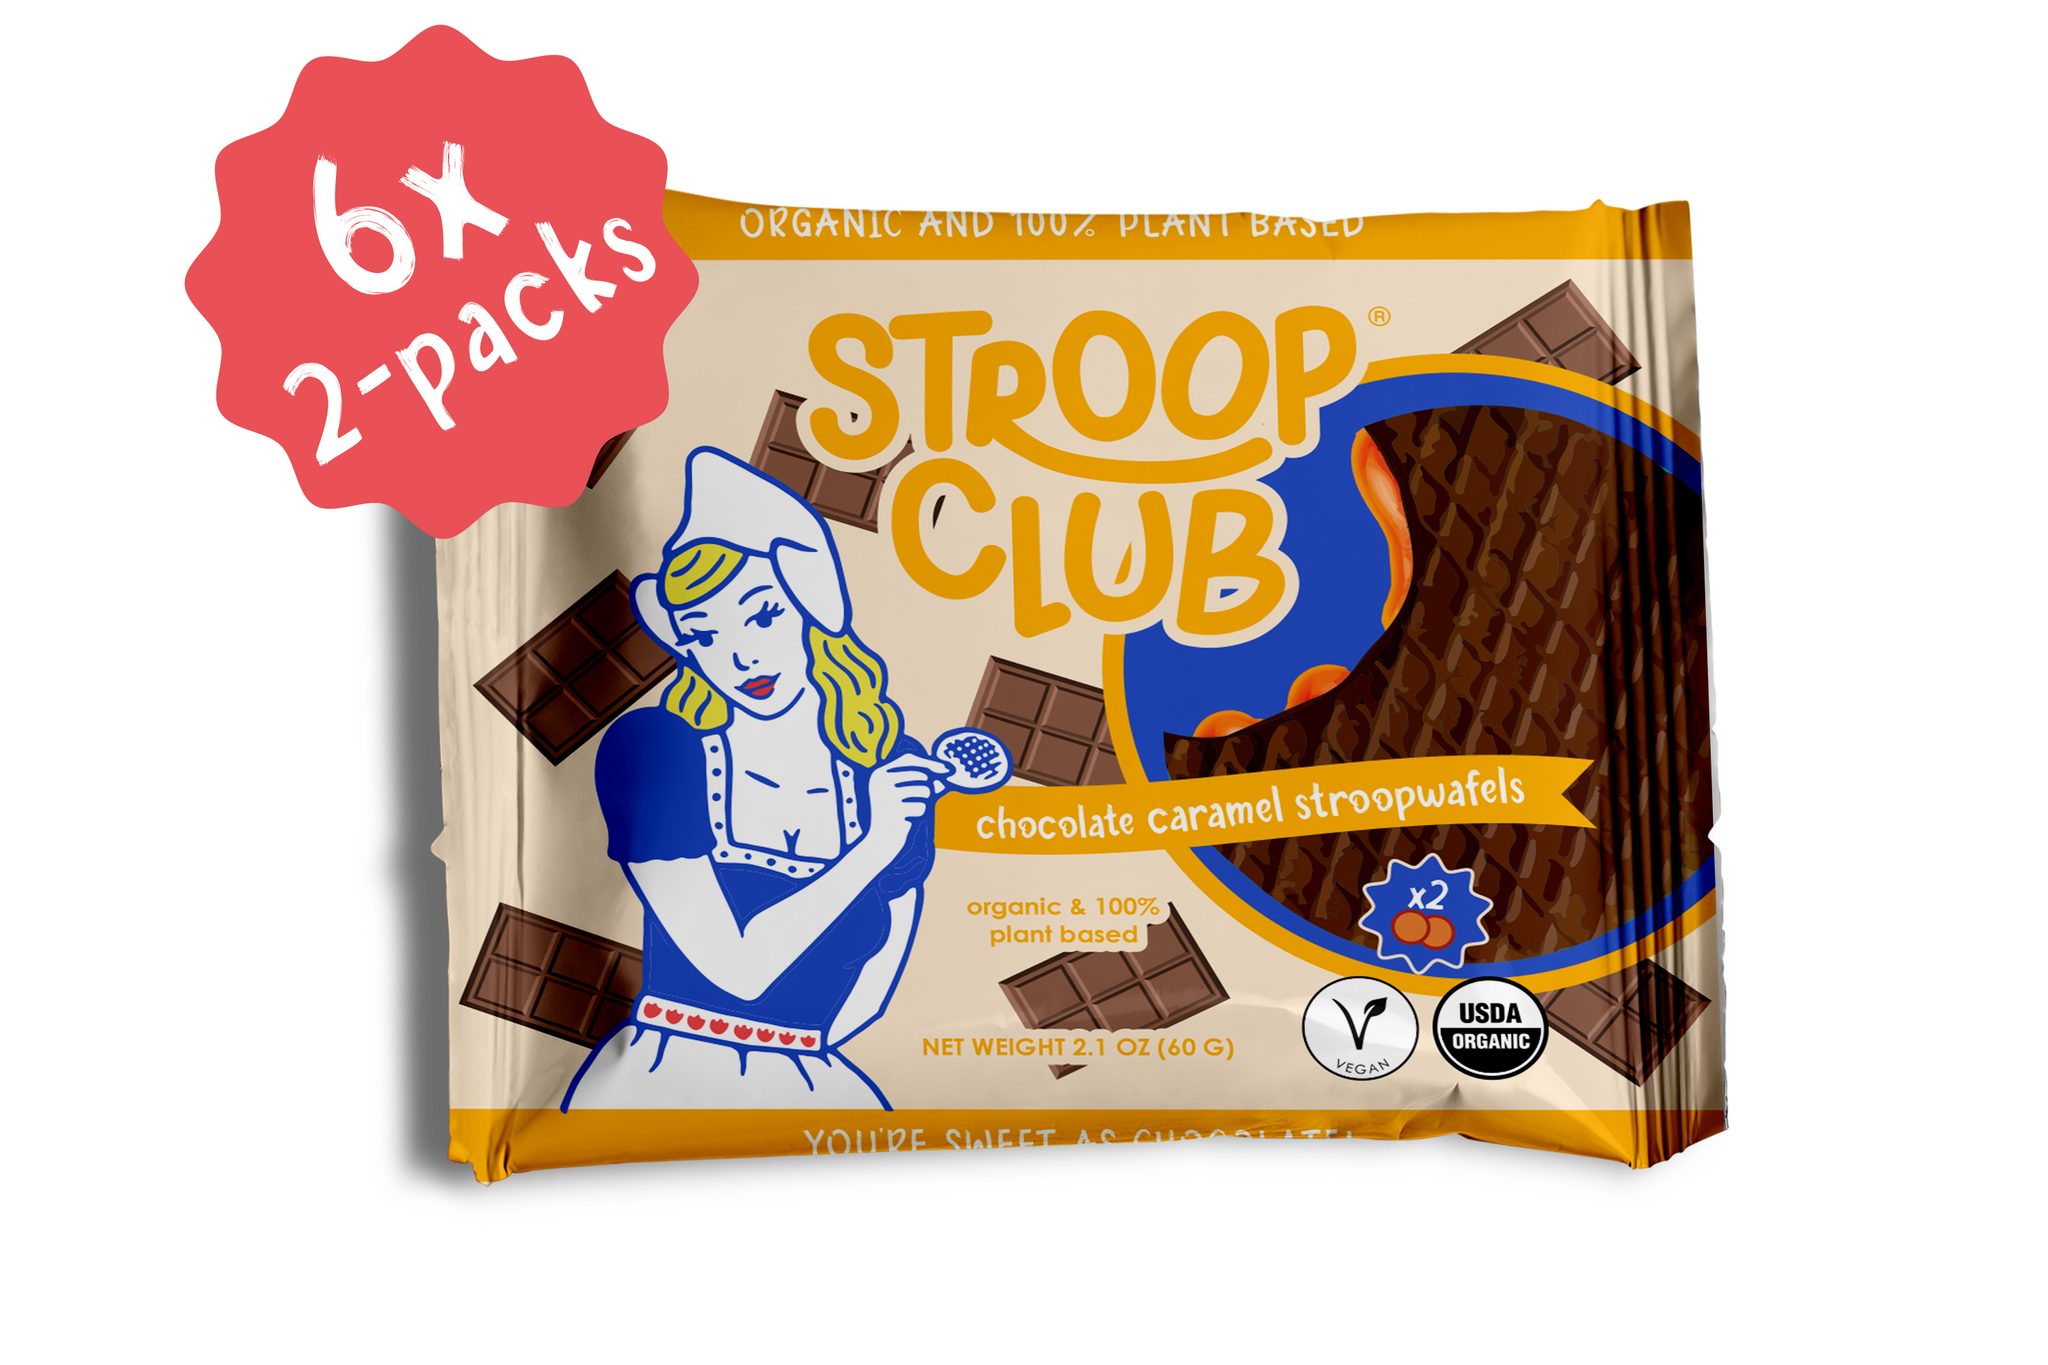 Chocolate Caramel Plant Based and Organic Stroopwafels (6x 2-pack - 12 total)